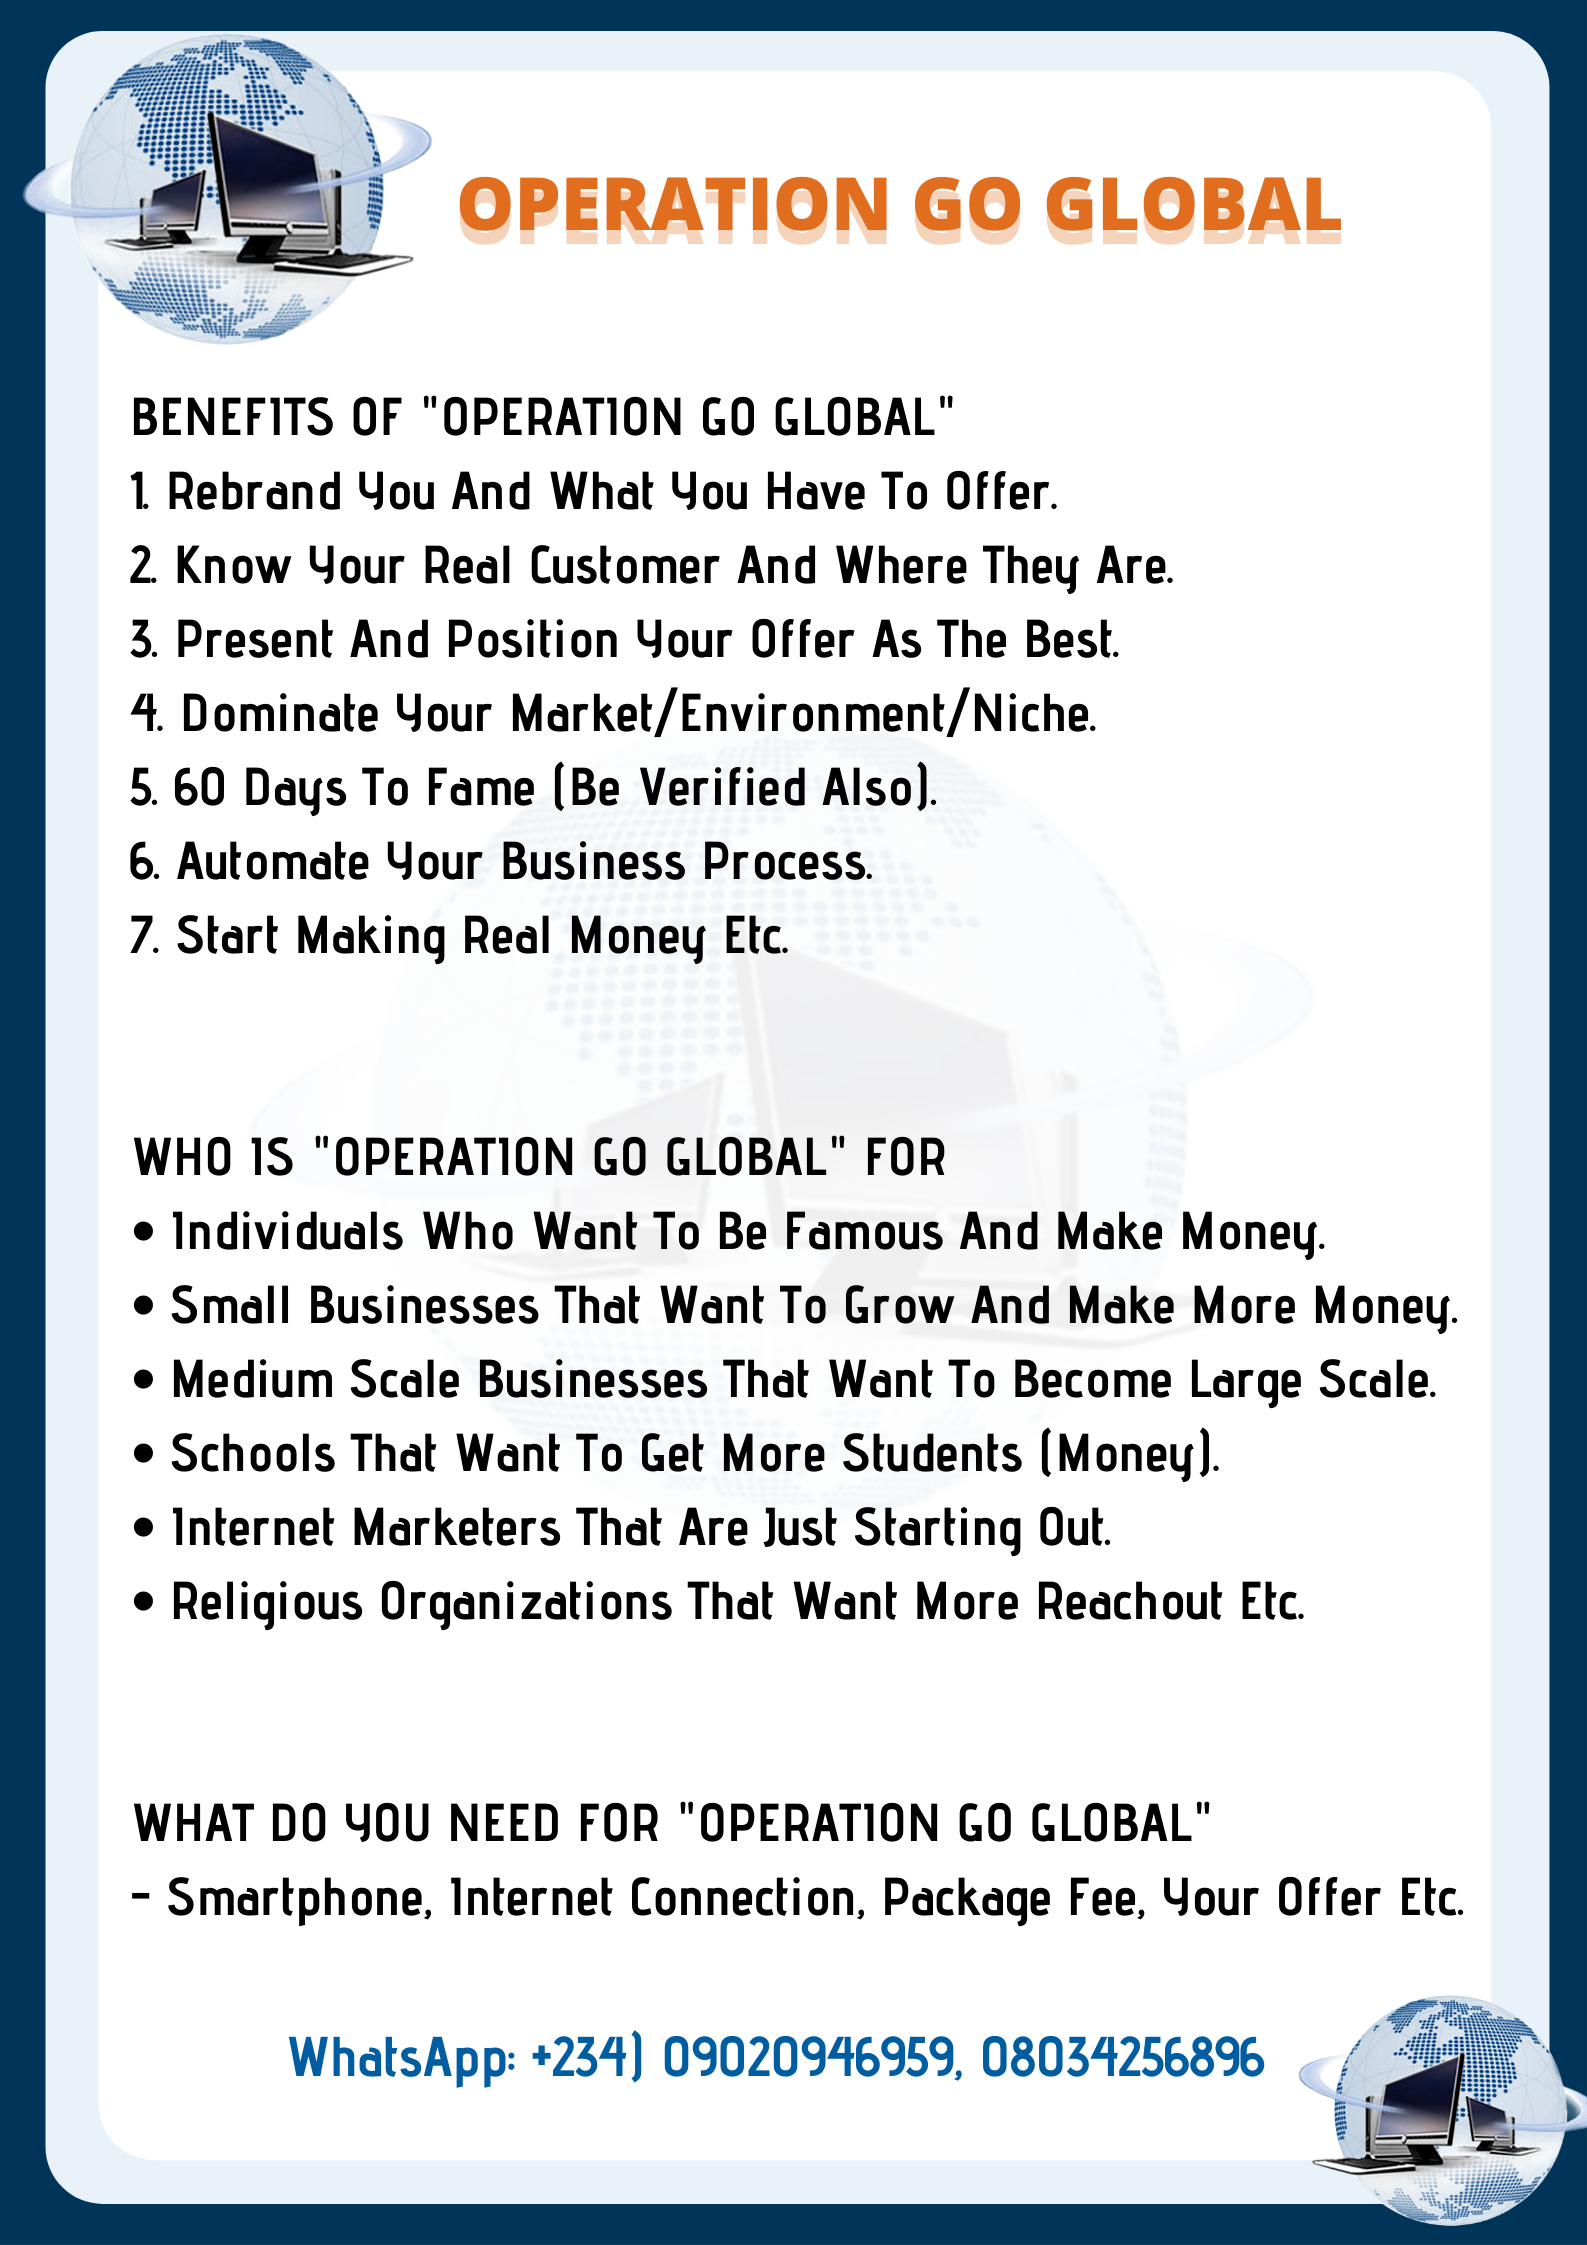 {| OPERATION GO GLOBAL

BENEFITS OF "OPERATION GO GLOBAL"

1 Rebrand You And What You Have To Offer.

2 Know Your Real Customer And Where They Are.
3. Present And Position Your Offer As The Best.

4 Dominate Your Market/Environment/Niche.
5.60 Days To Fame (Be Verified Also).

6. Automate Your Business Process.

7. Start Making Real Money Etc.

WHO 1S "OPERATION GO GLOBAL" FOR

¢ Individuals Who Want To Be Famous And Make Money.

e Small Businesses That Want To Grow And Make More Money.
¢ Medium Scale Businesses That Want To Become Large Scale.
e Schools That Want To Get More Students (Money).

e Internet Marketers That Are Just Starting Out.

® Religious Organizations That Want More Reachout Etc.

WHAT DO YOU NEED FOR "OPERATION GO GLOBAL"
- Smartphone, Internet Connection, Package Fee, Your Offer Etc.

i
i

WhatsApp: +234) 09020946959, 080342568% . / a